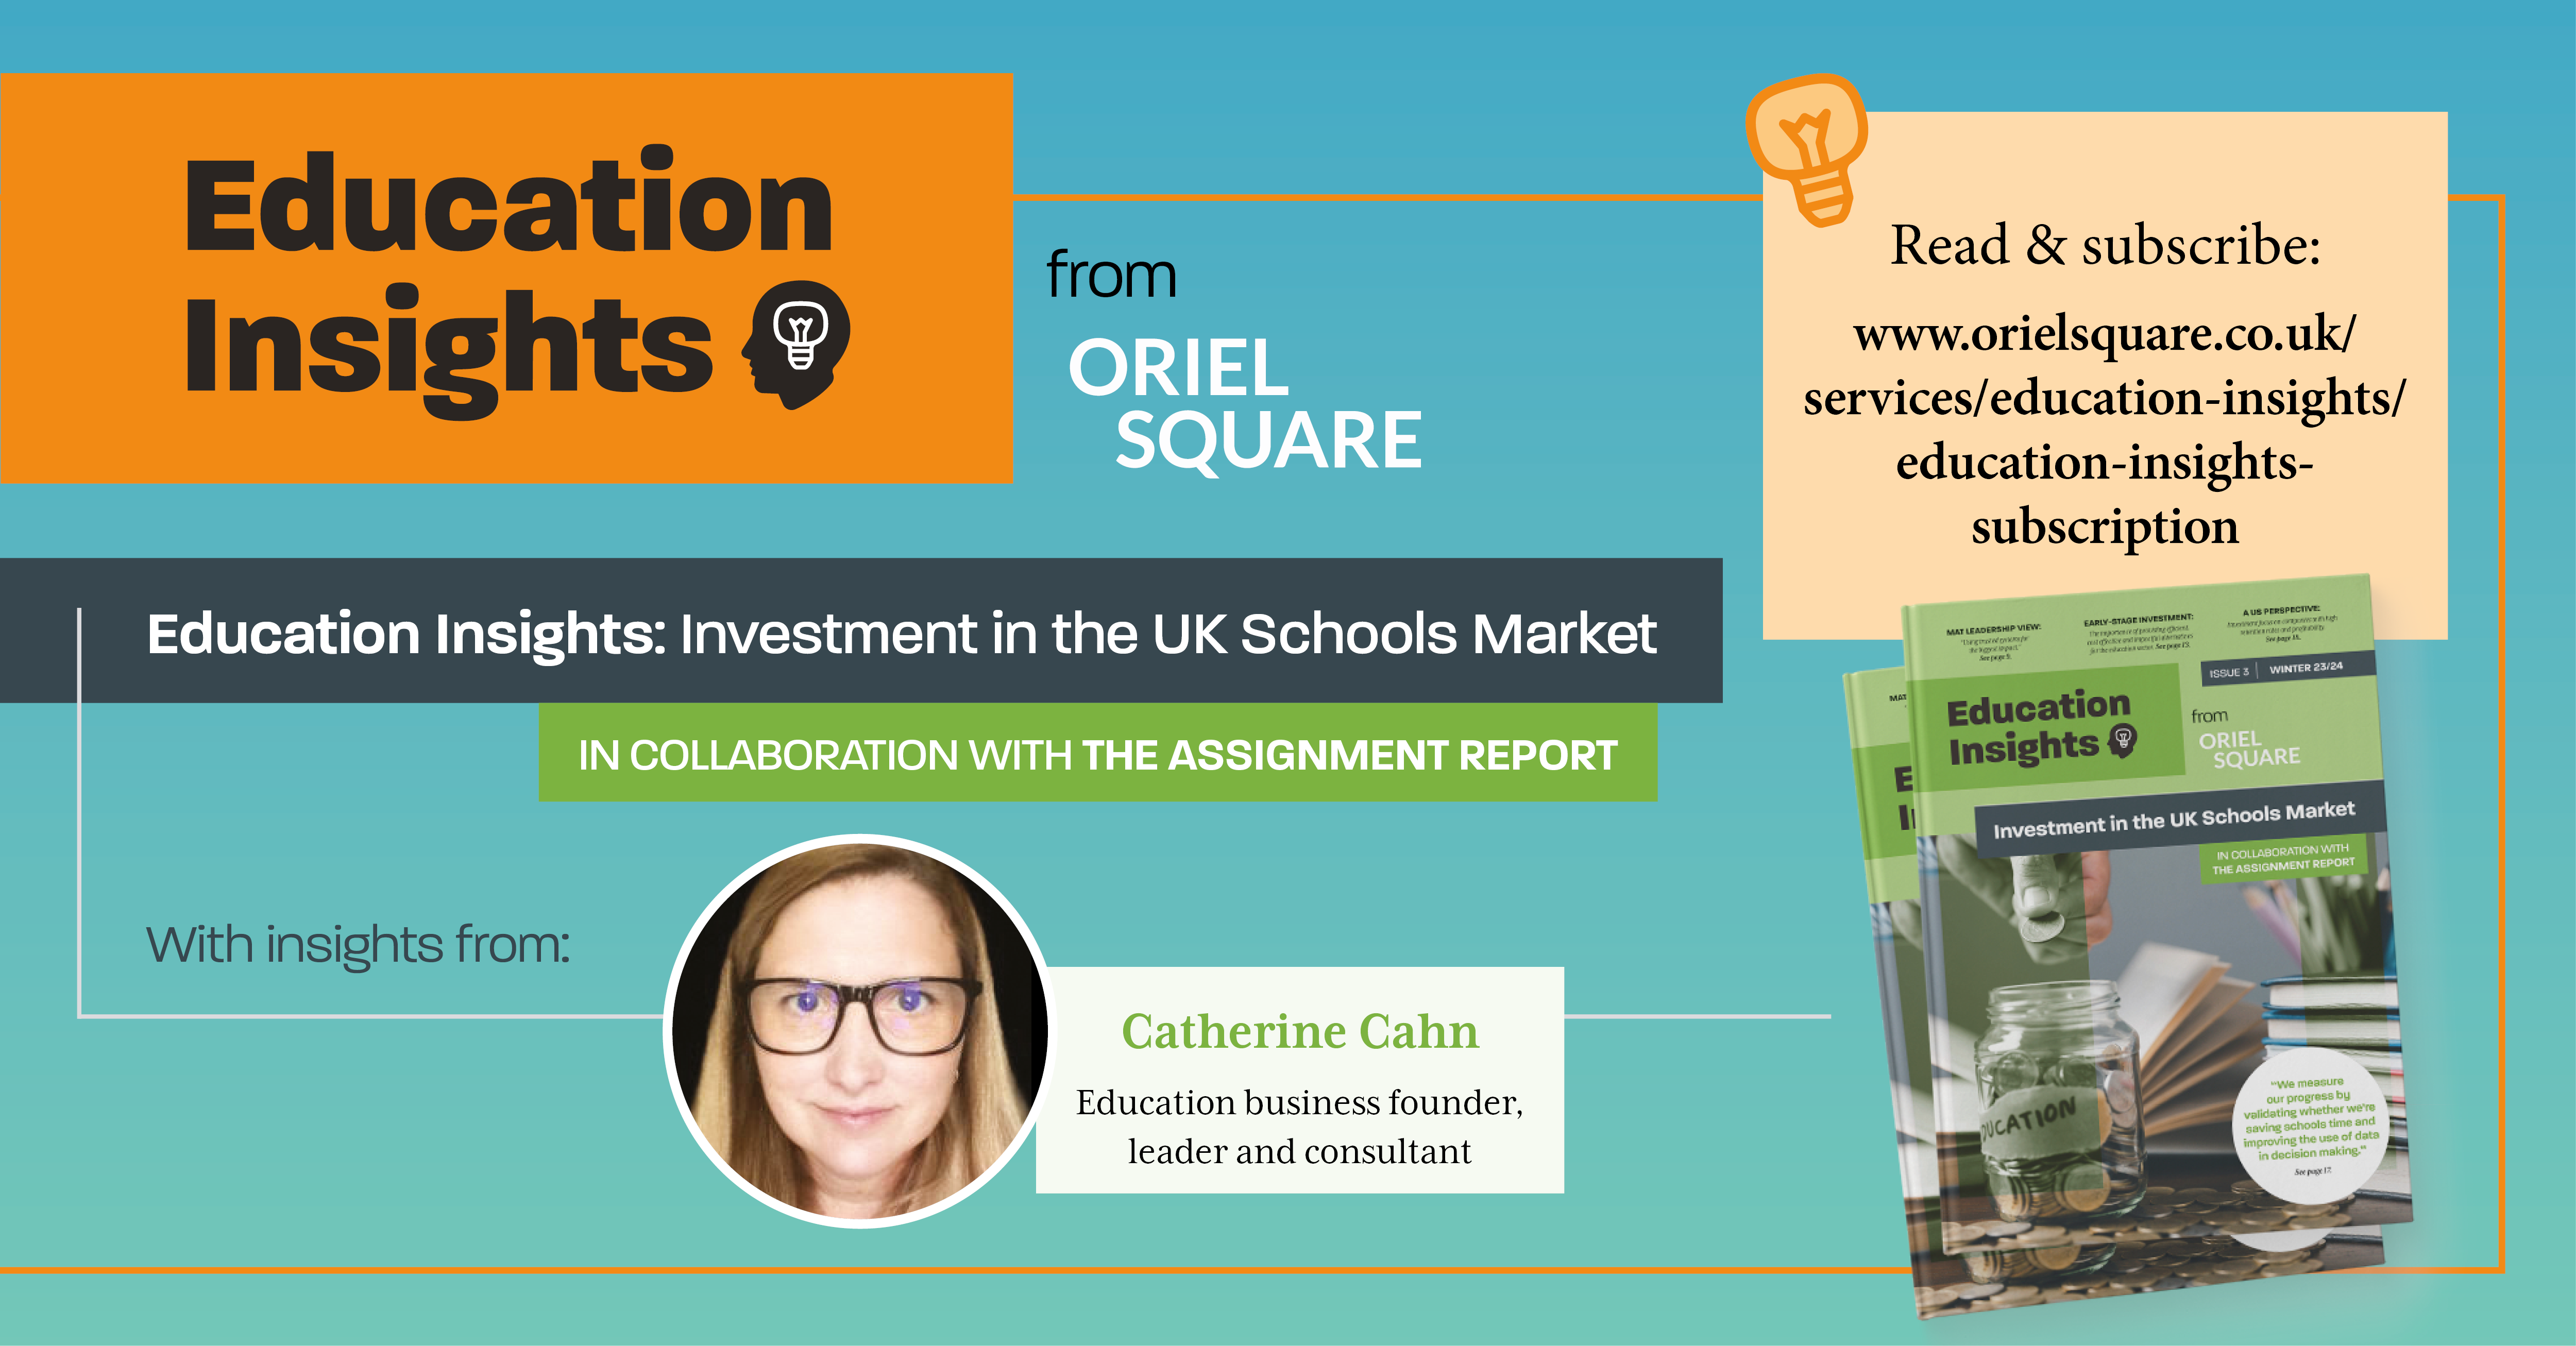 Read & subscribe: https://www.orielsquare.co.uk/services/education-insights/education-insights-subscription/> Education Insights: Investment in the UK Schools Market In collaboration with The Assignment Report With insights from: Catherine Cahn Education business founder, leader and consultant